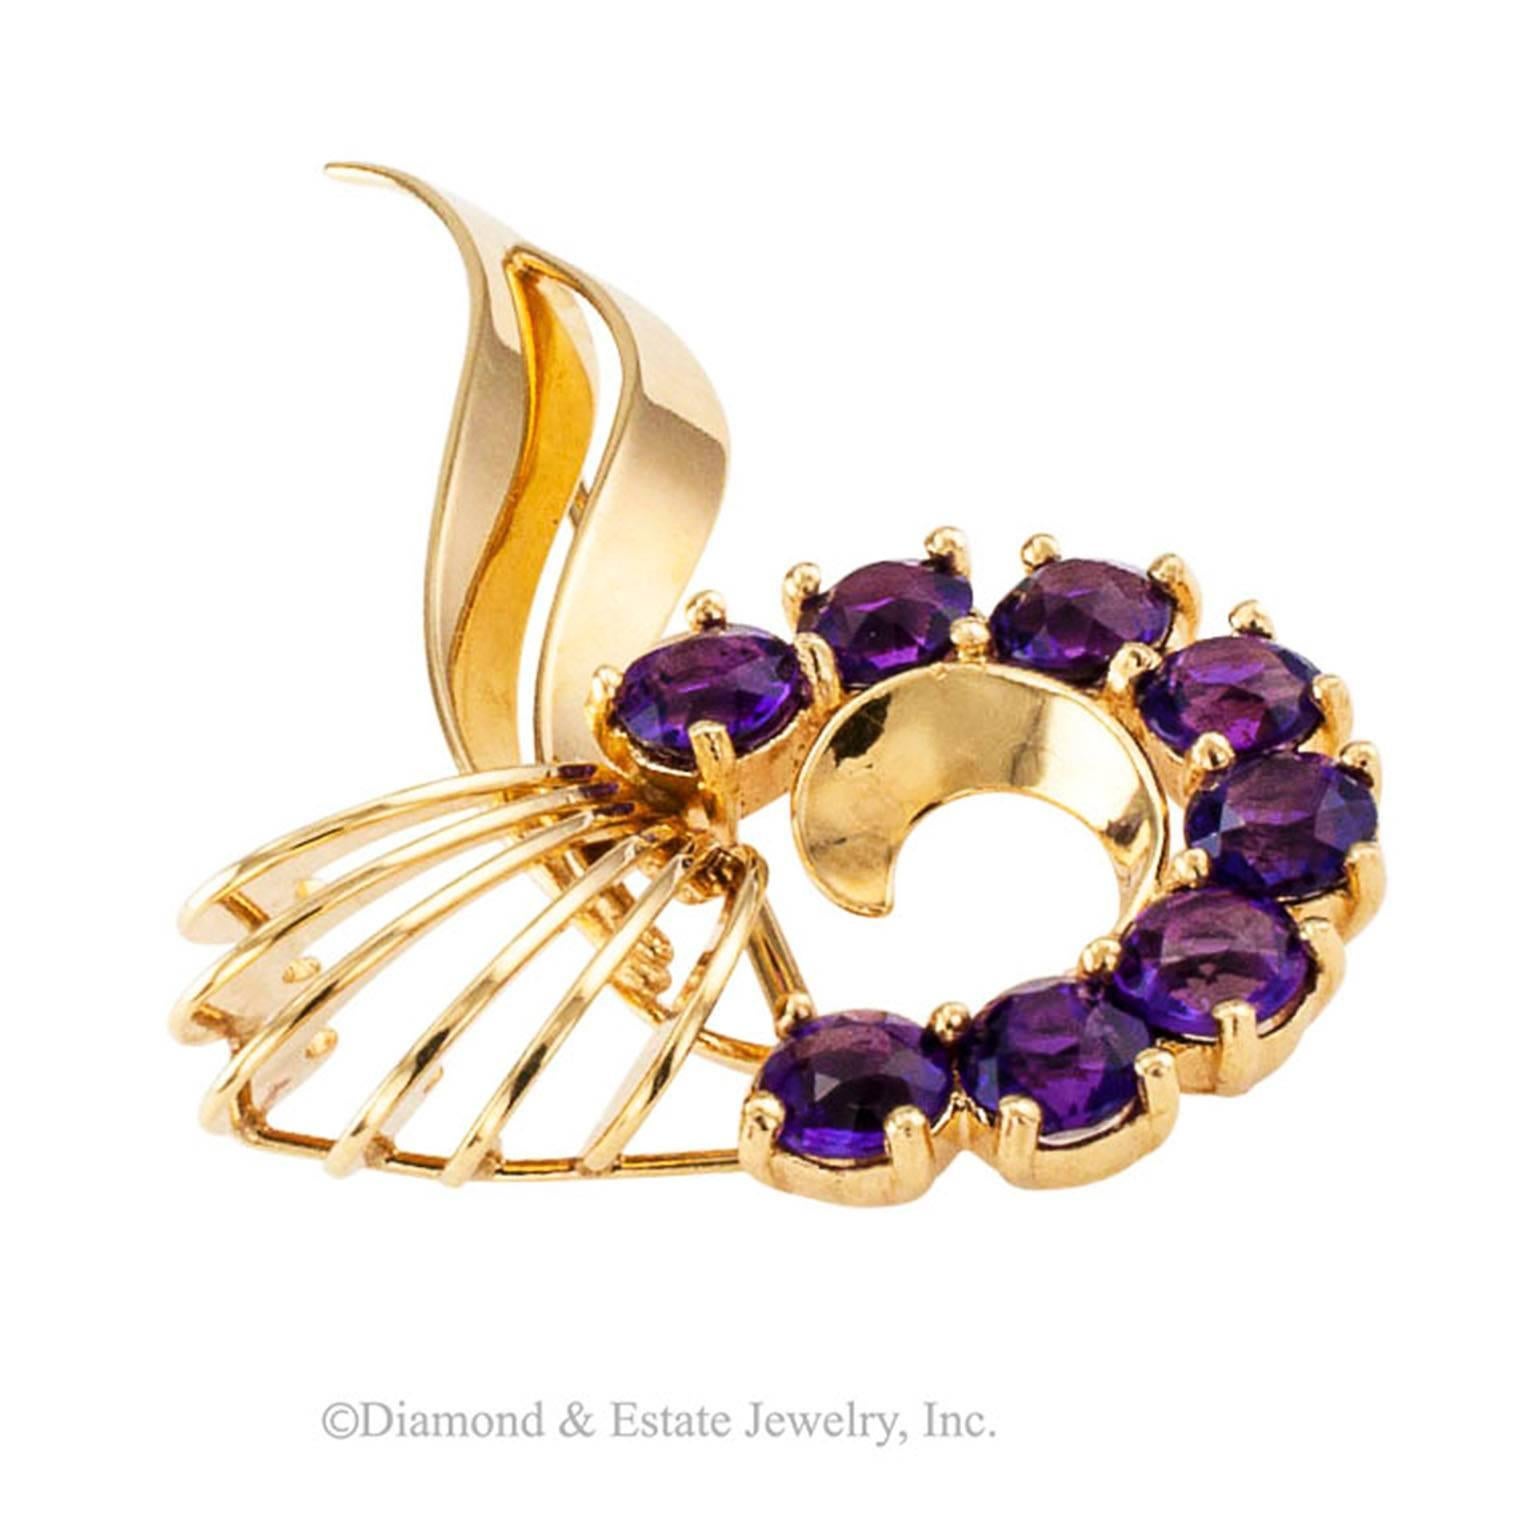 Krementz Amethyst and Gold Retro Brooch/Pendant

In all of its simplicity, contemplate how beautiful this pin is.  It has so much movement.  All of it so graceful.  It is a burst of joy!   The design is so well thought out.  The amethyst... such